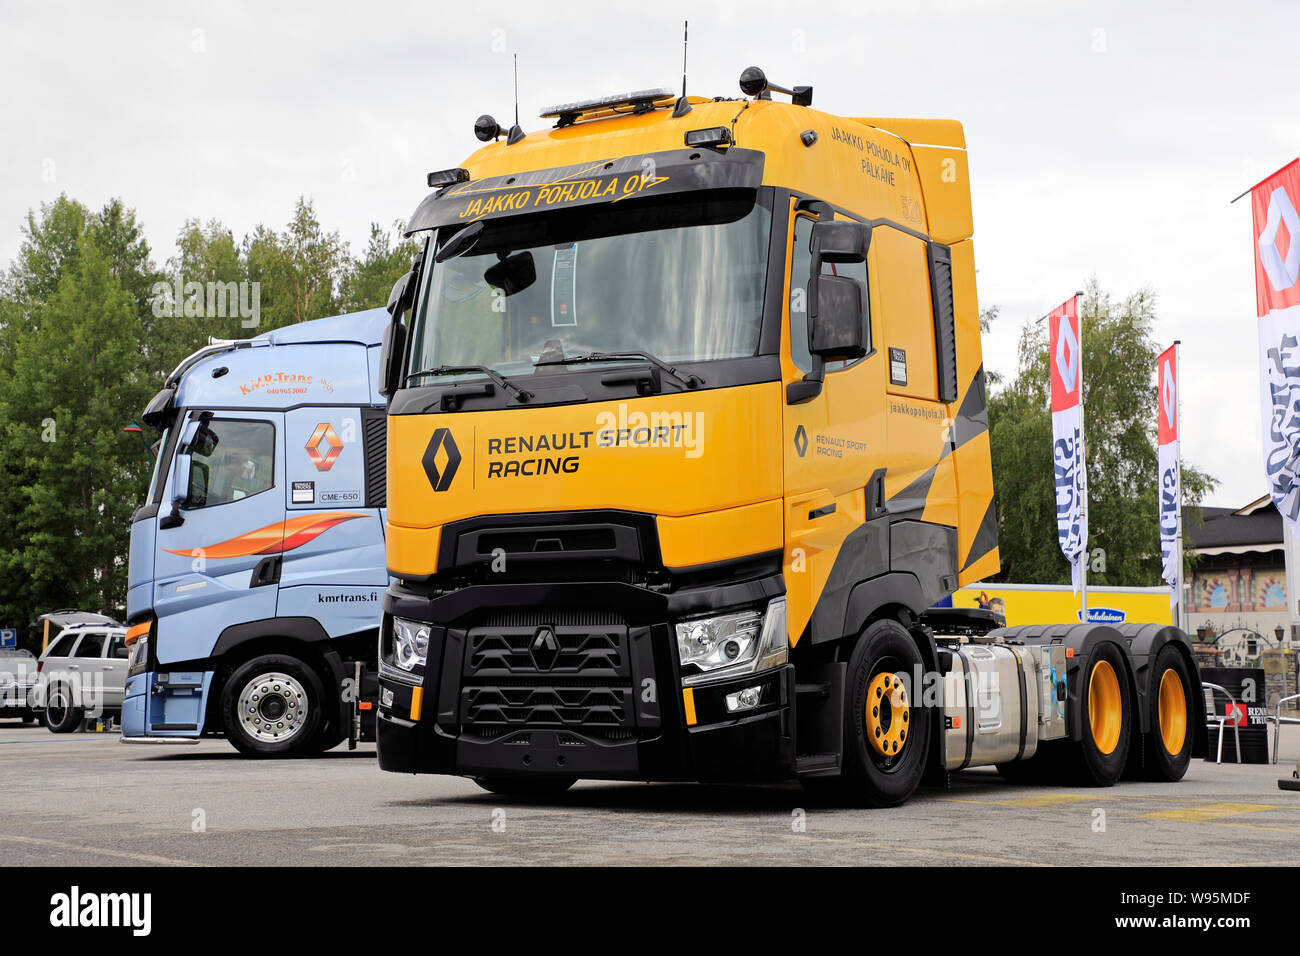 https://c8.alamy.com/comp/W95MDF/alaharma-finland-august-9-2019-renault-trucks-t-high-renault-sport-racing-limited-edition-of-100-vehicles-total-on-power-truck-show-2019-W95MDF.jpg